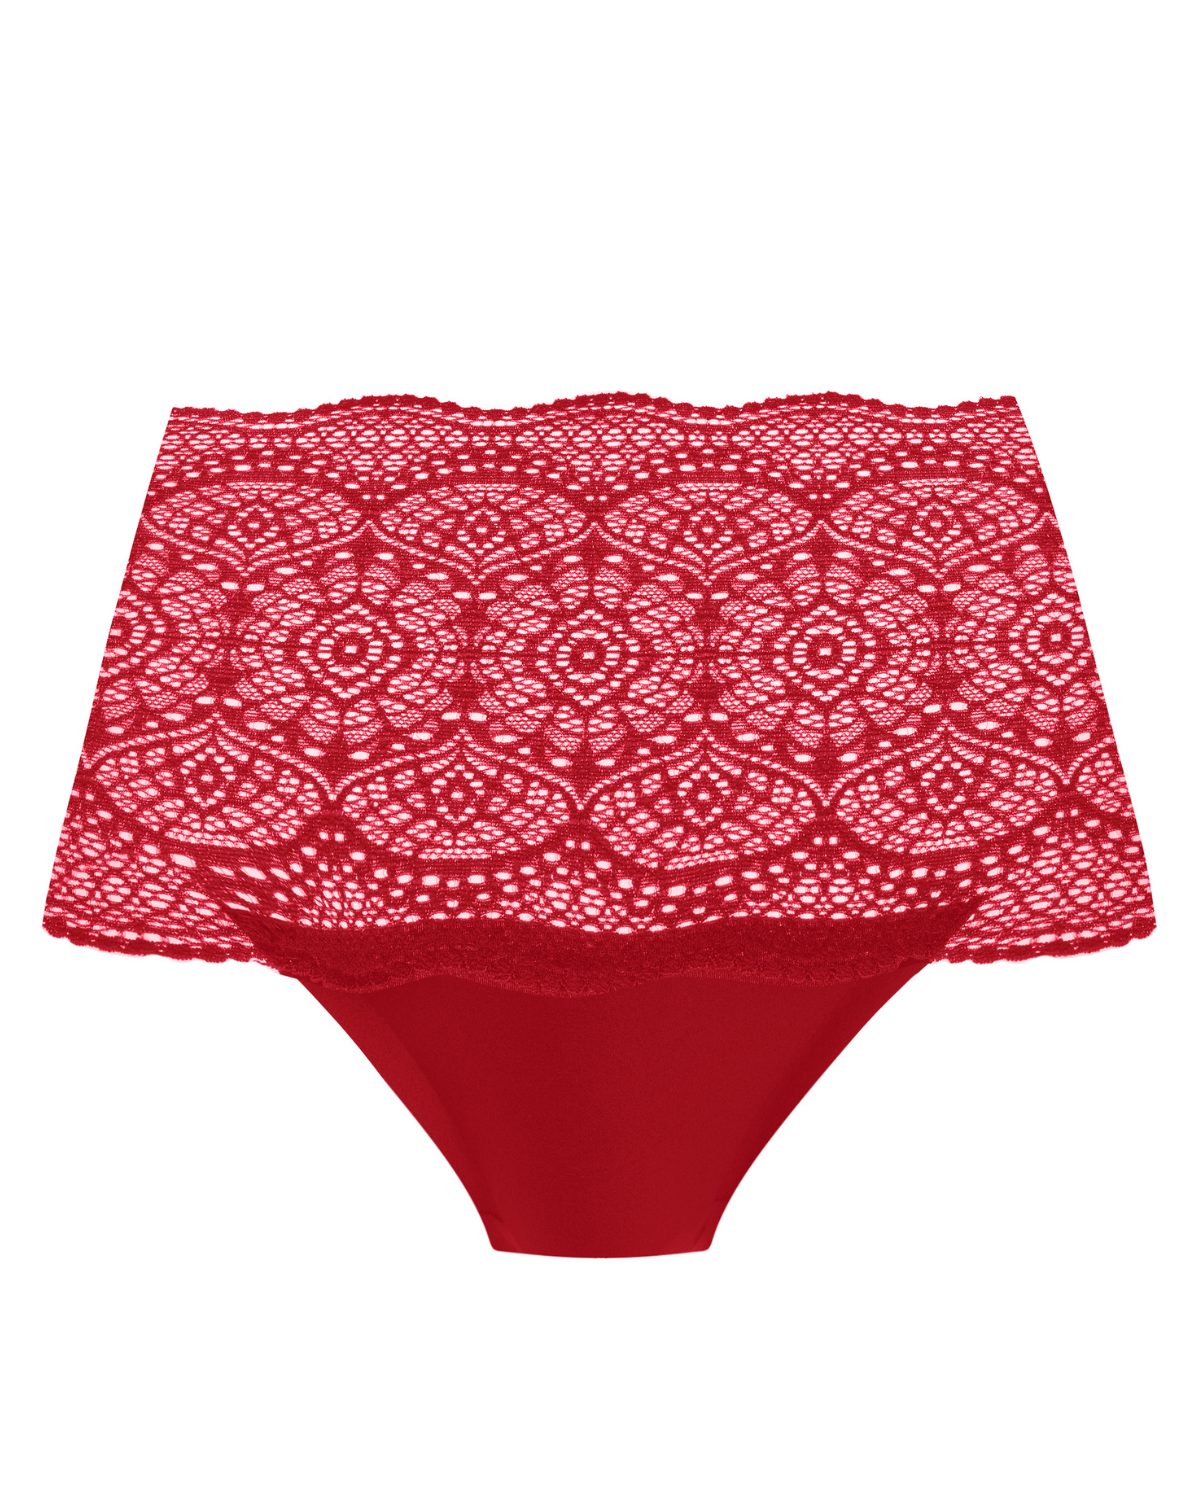 Flat lay of a wide lace band brief panty in red